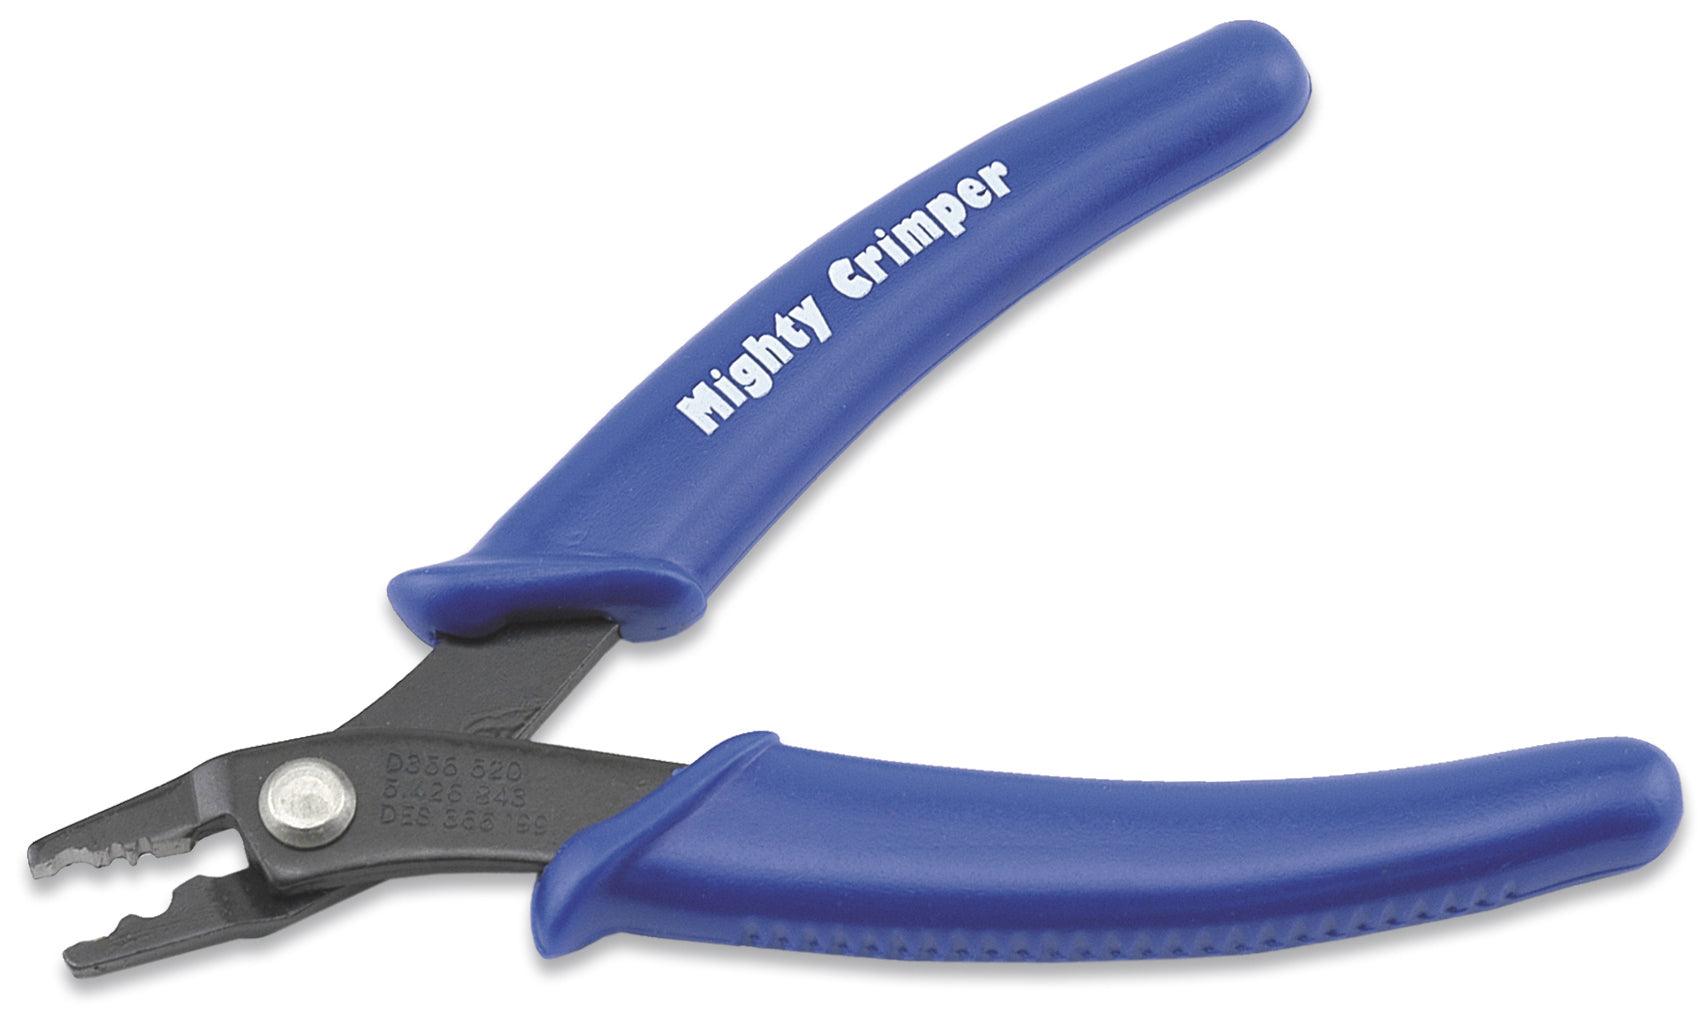 The Mighty Crimper - Crimping pliers for Jewelry Making